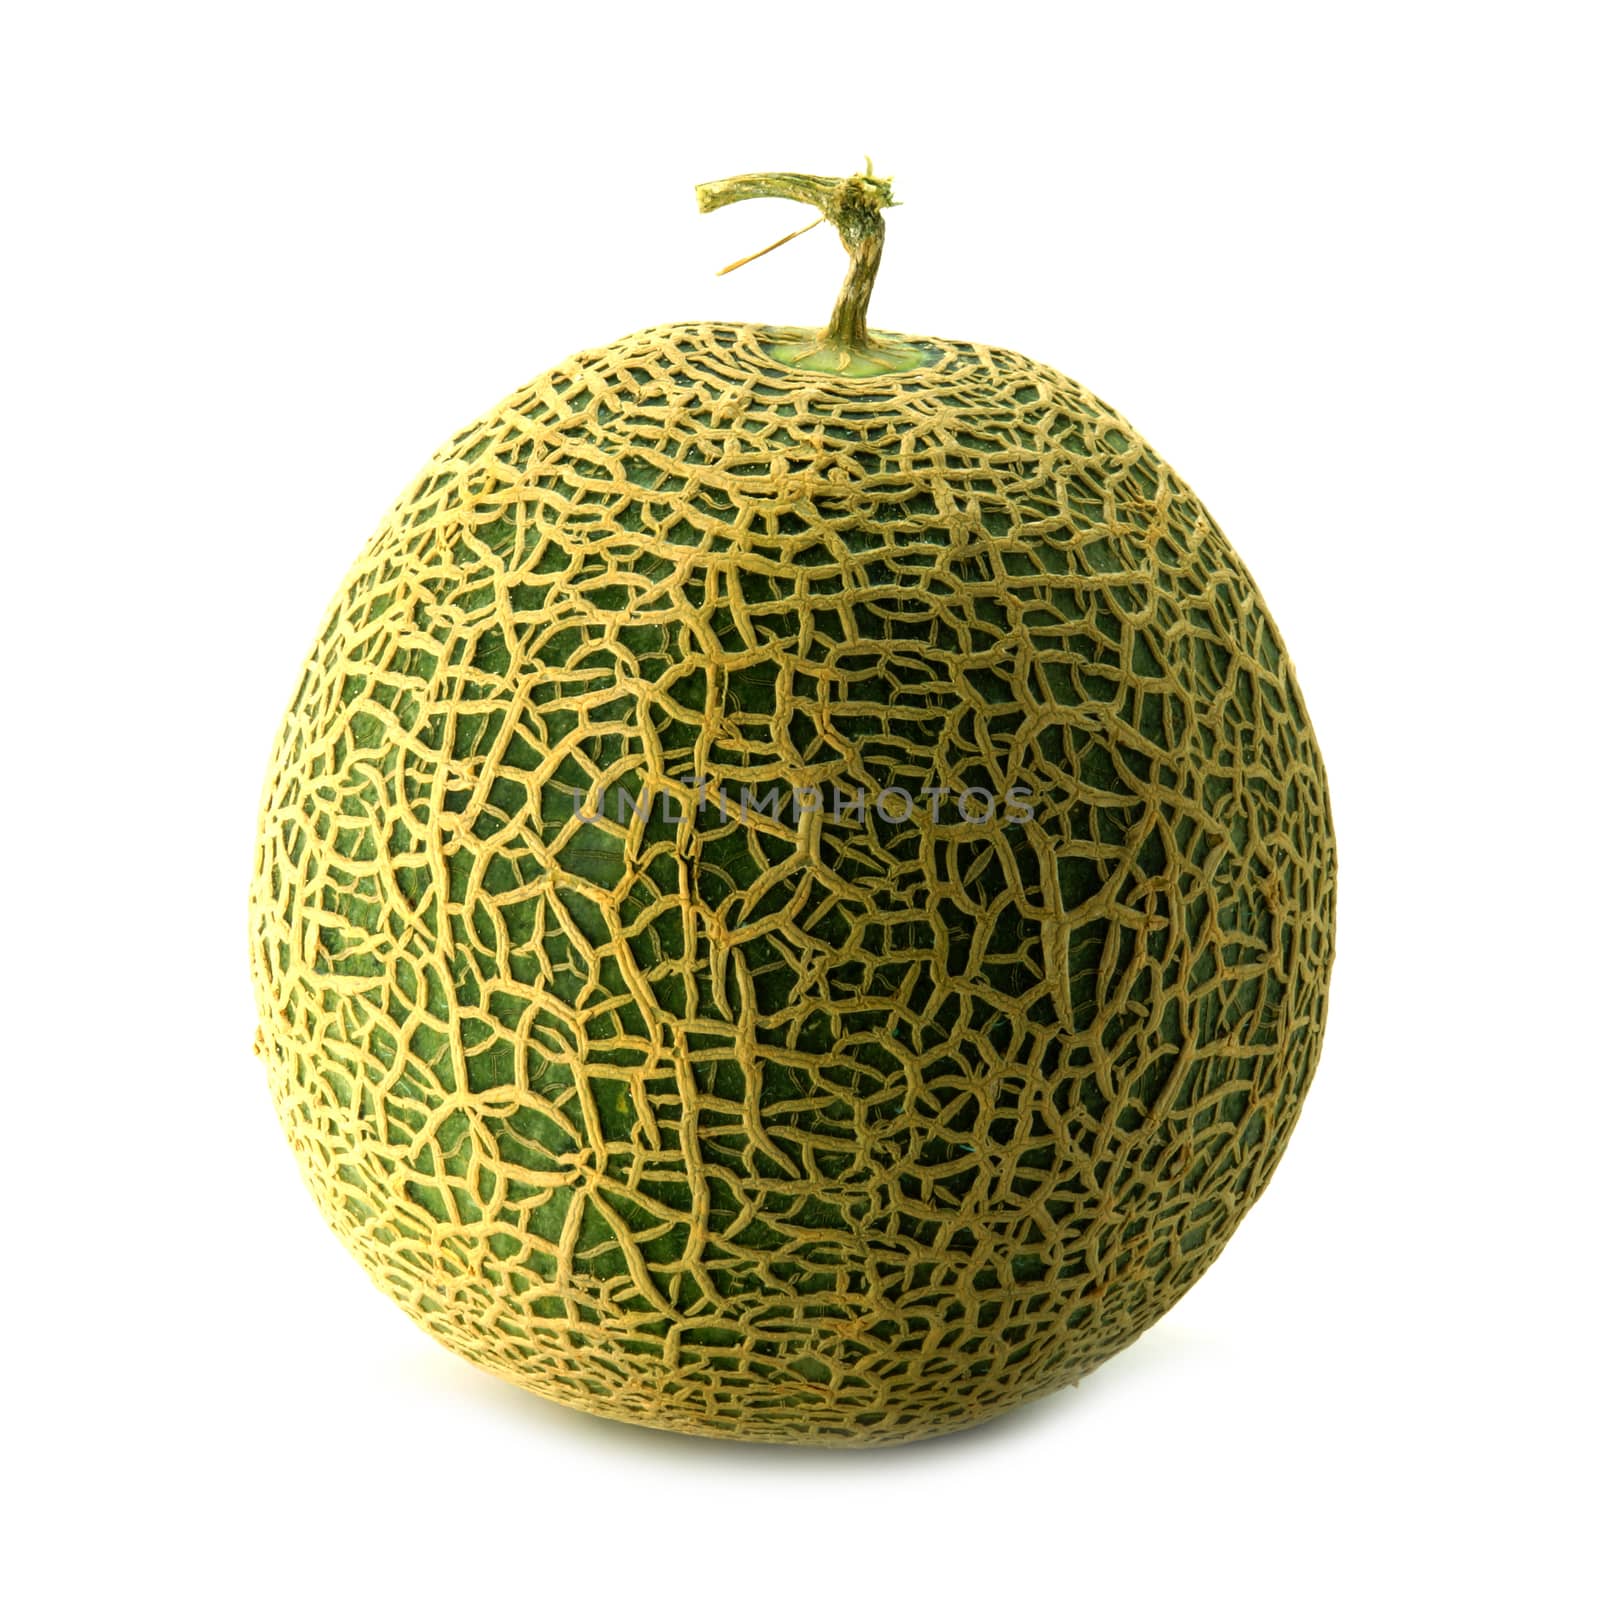 Netted melon on white background by Noppharat_th